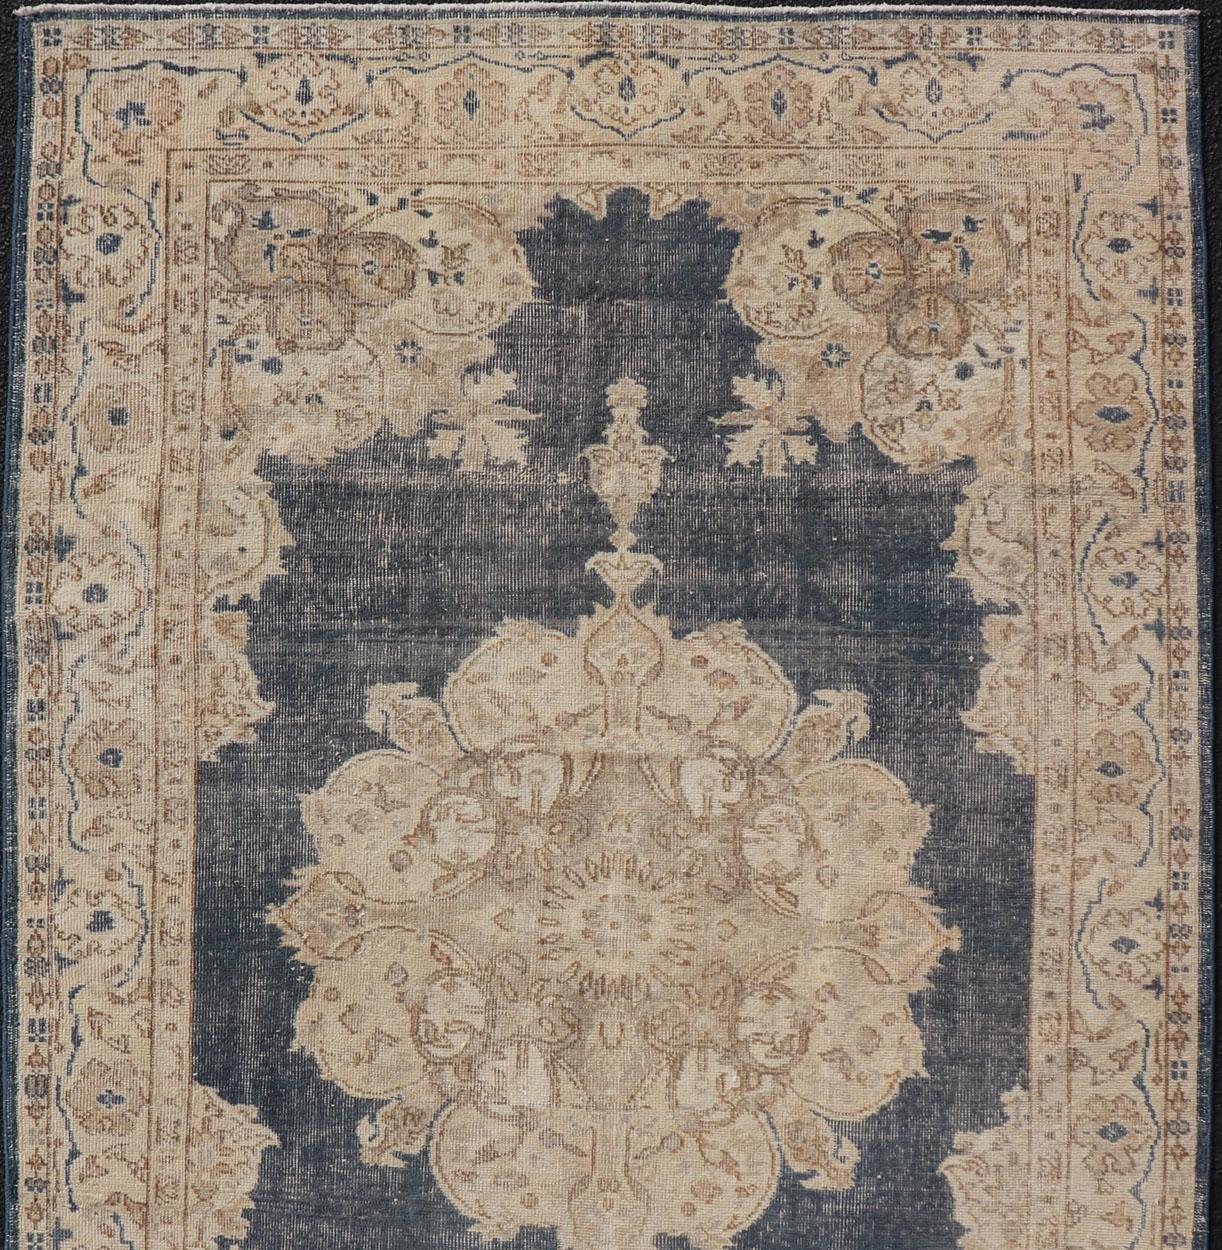 Hand-Knotted Distressed Turkish Carpet with Floral Design in Blue, Tan, Taupe, and Cream For Sale